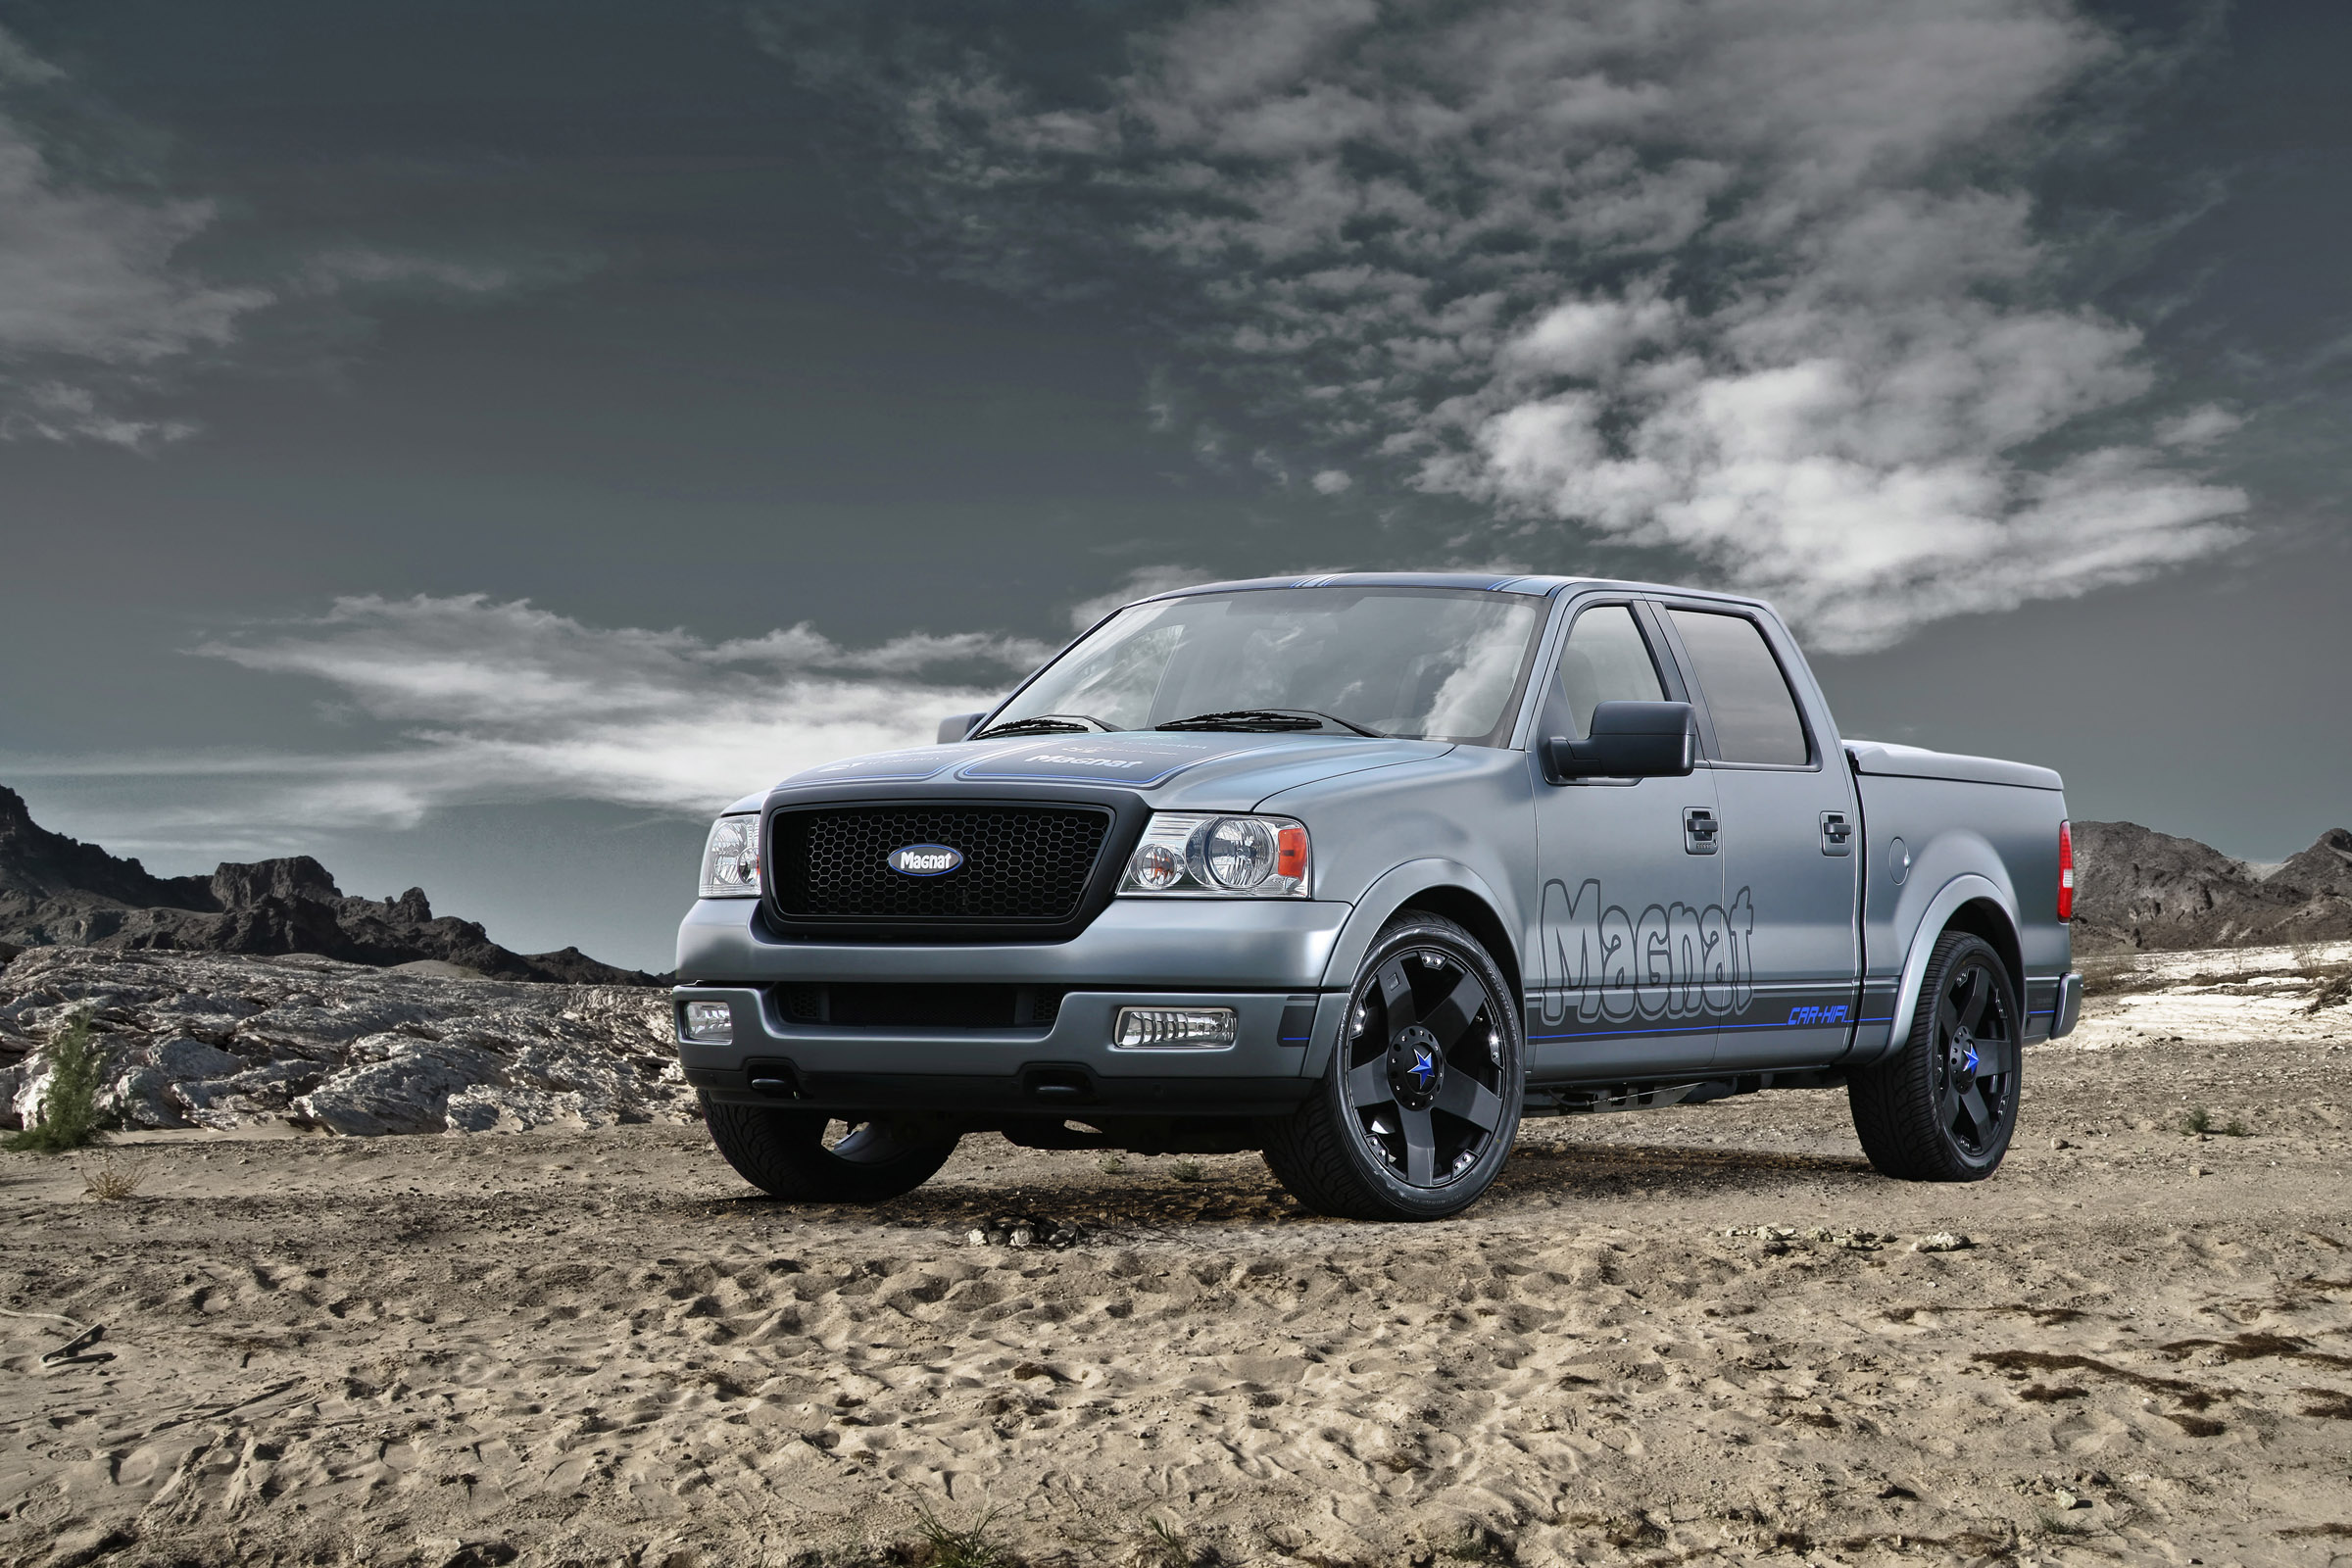 Magnat Ford F-150 show pick-up truck